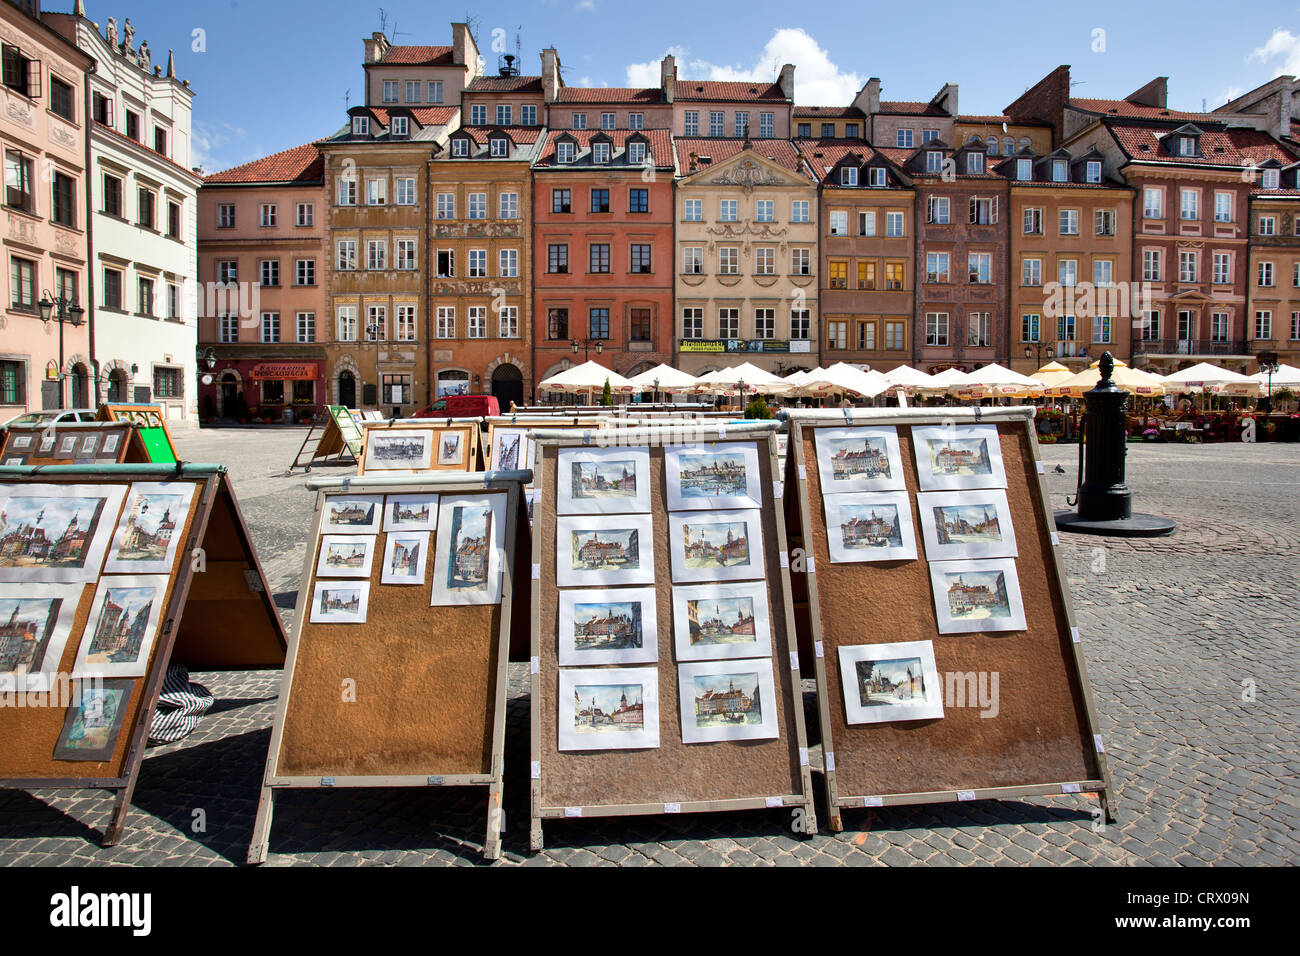 Artists work in the Market place, Old Town Warsaw, Poland. (Warszawa). Stock Photo